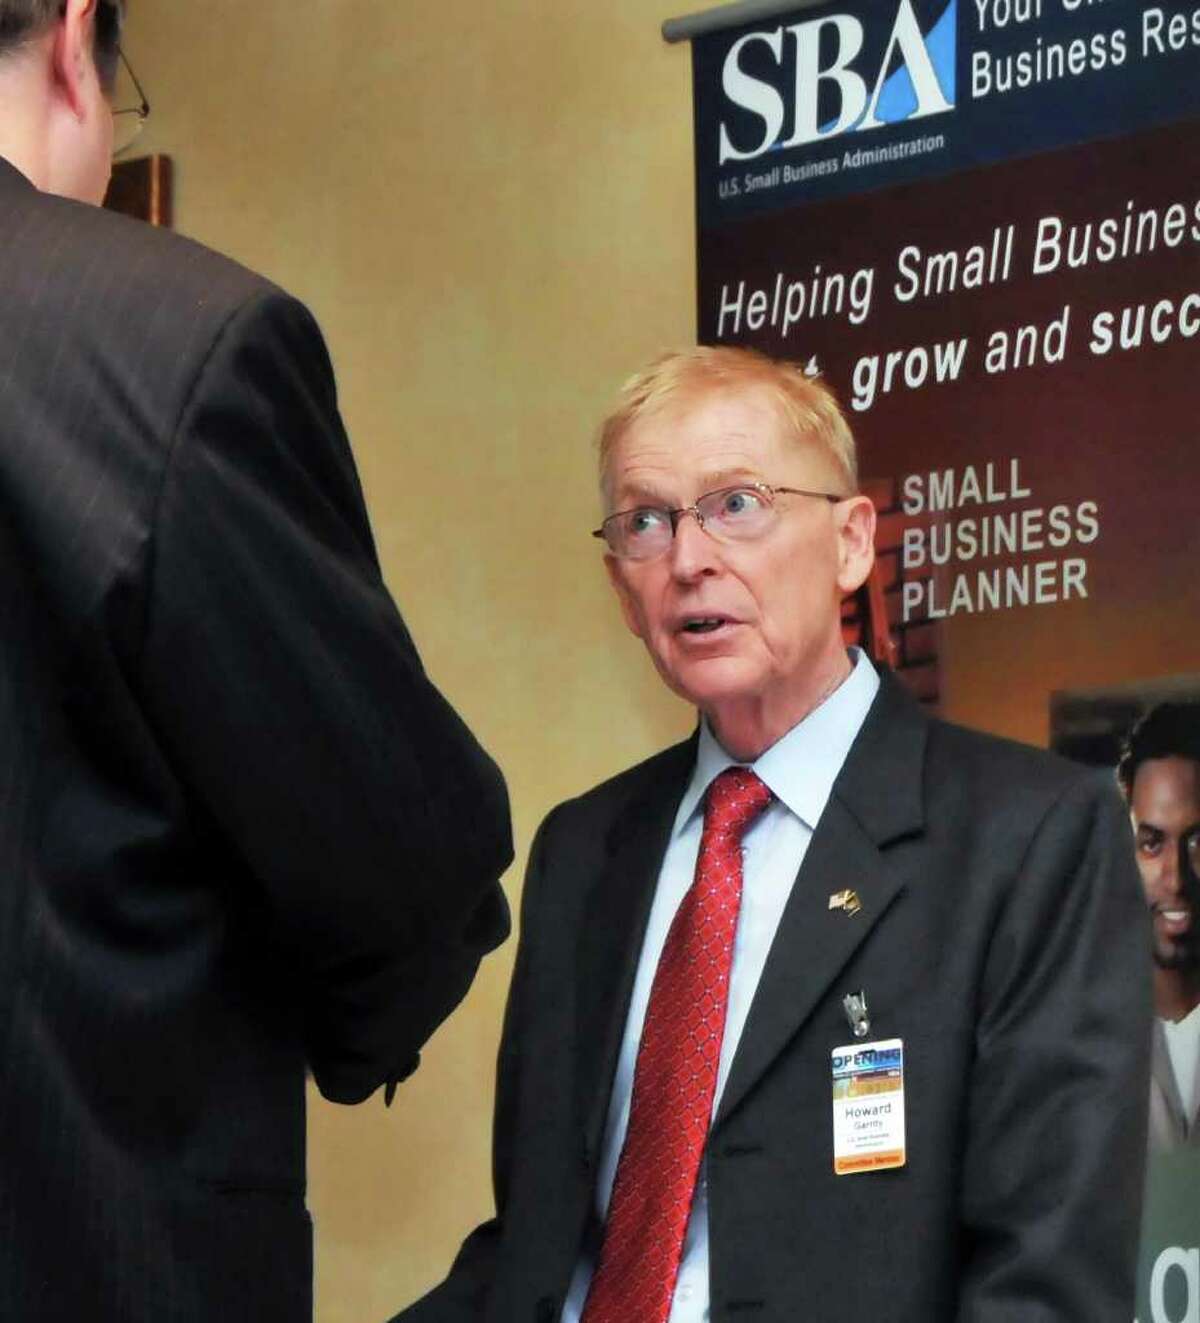 U.S. SBA's Howard Garrity of Syracuse answers questions during a small business networking conference at Albany Marriott in Colonie Tuesday morning September 14, 2010. (John Carl D'Annibale / Times Union)